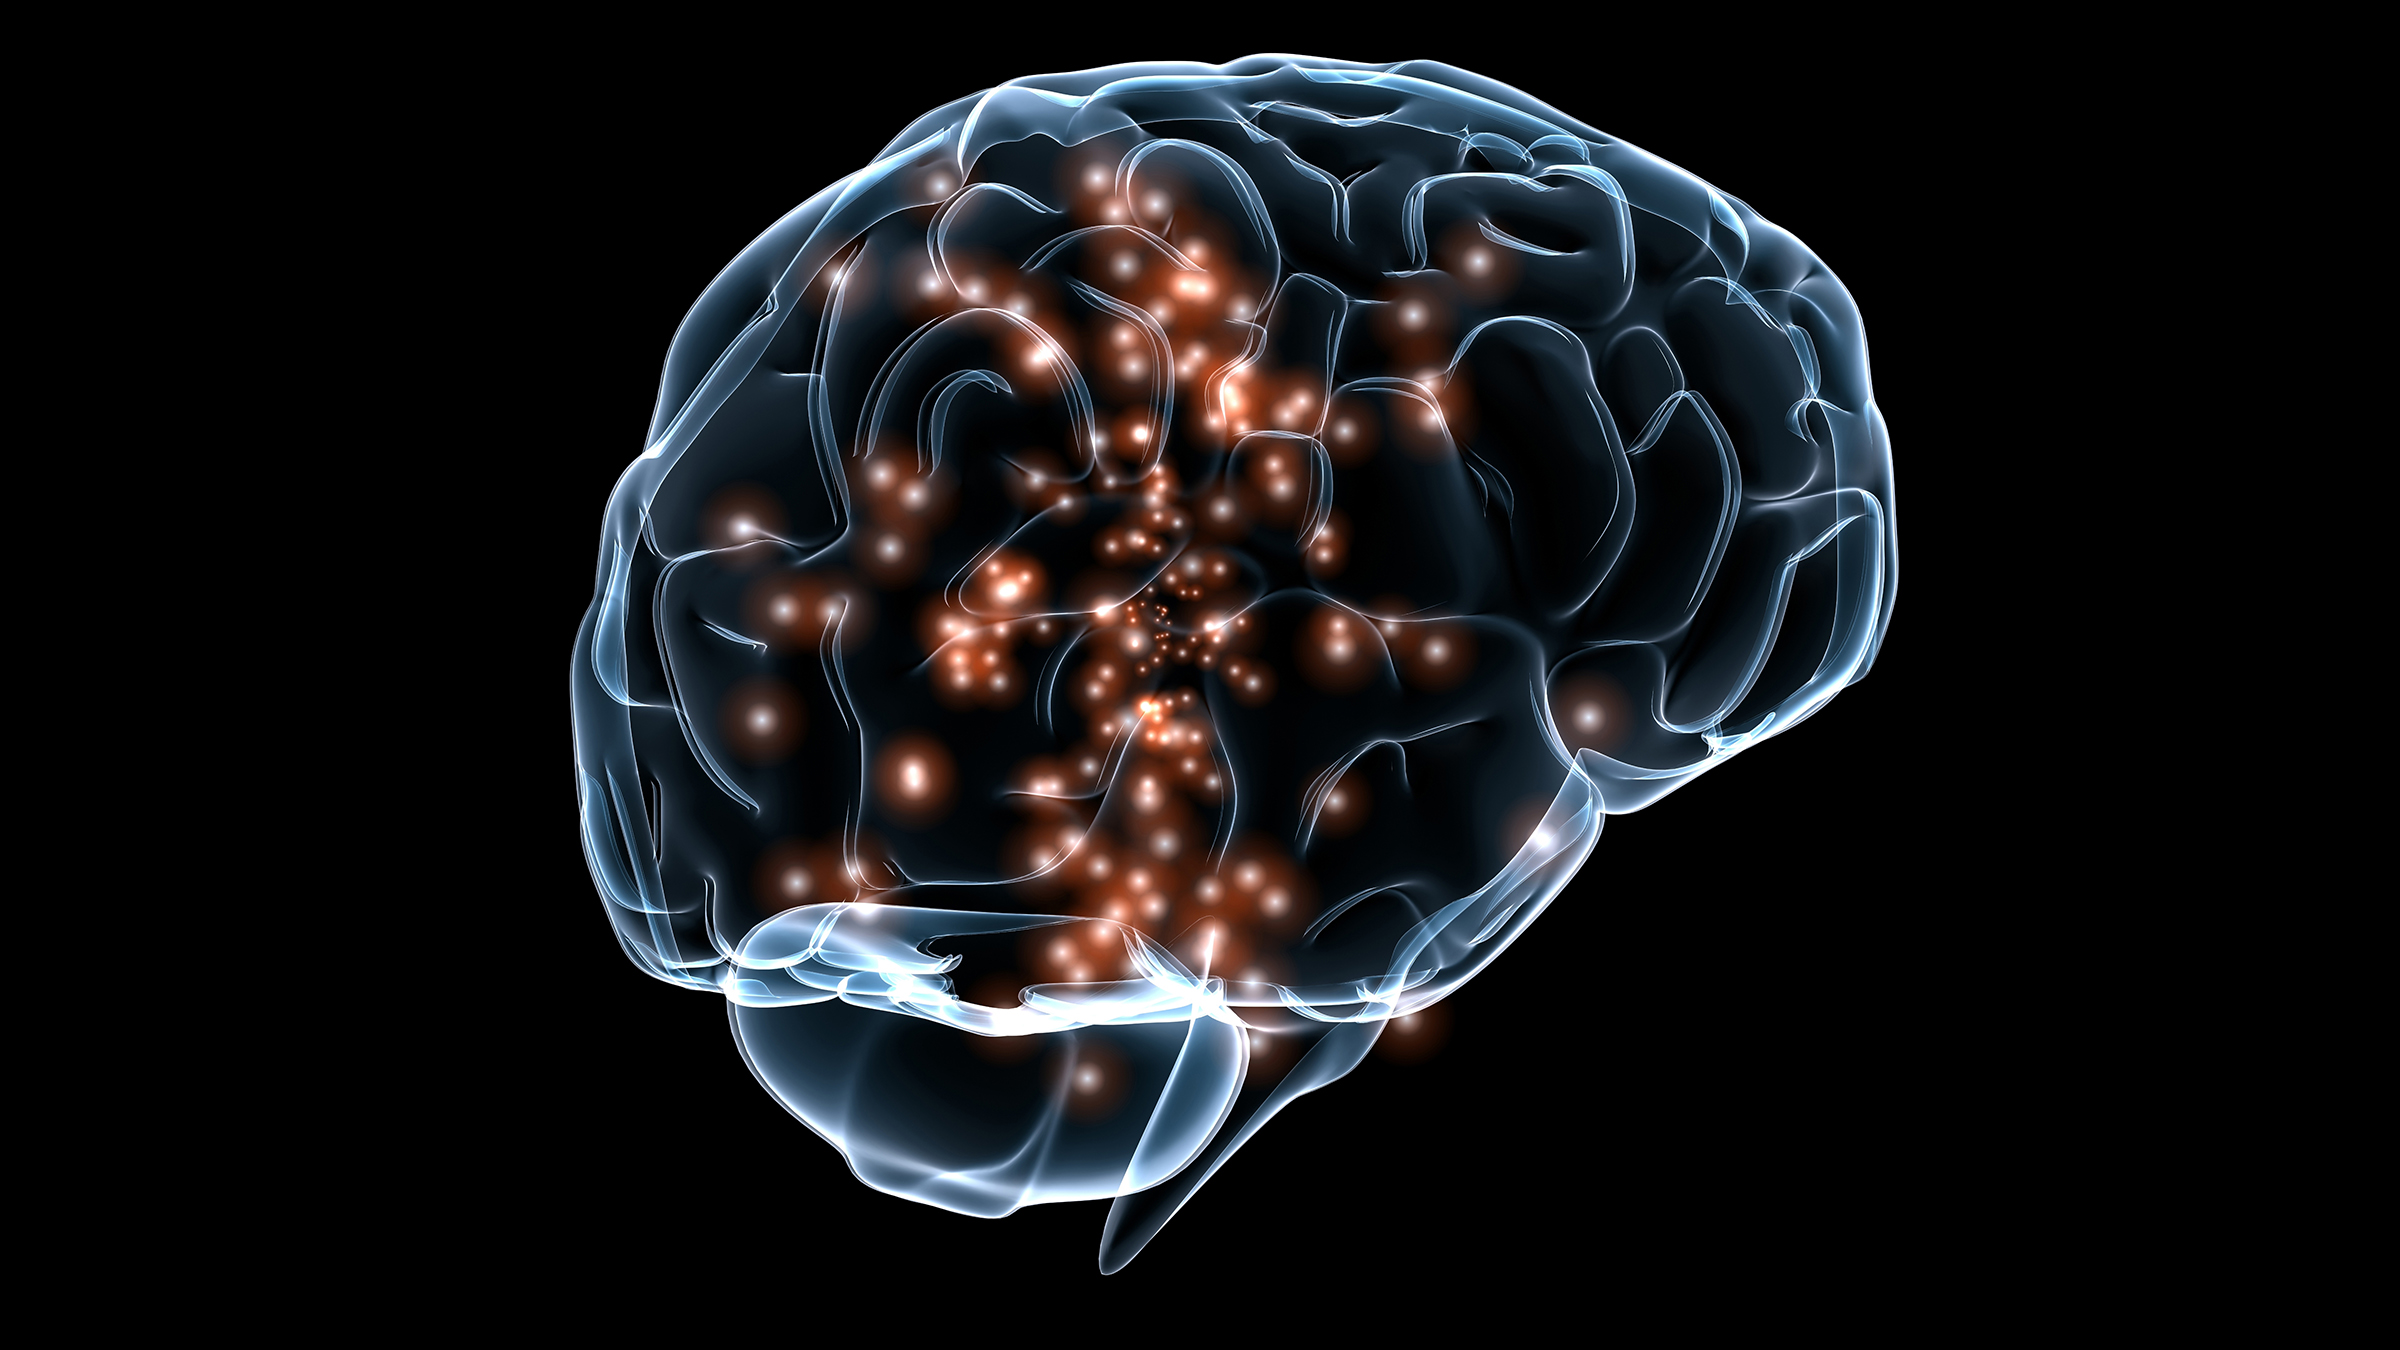 Illustration of a see-through brain with bright orange spots scattered in the interior